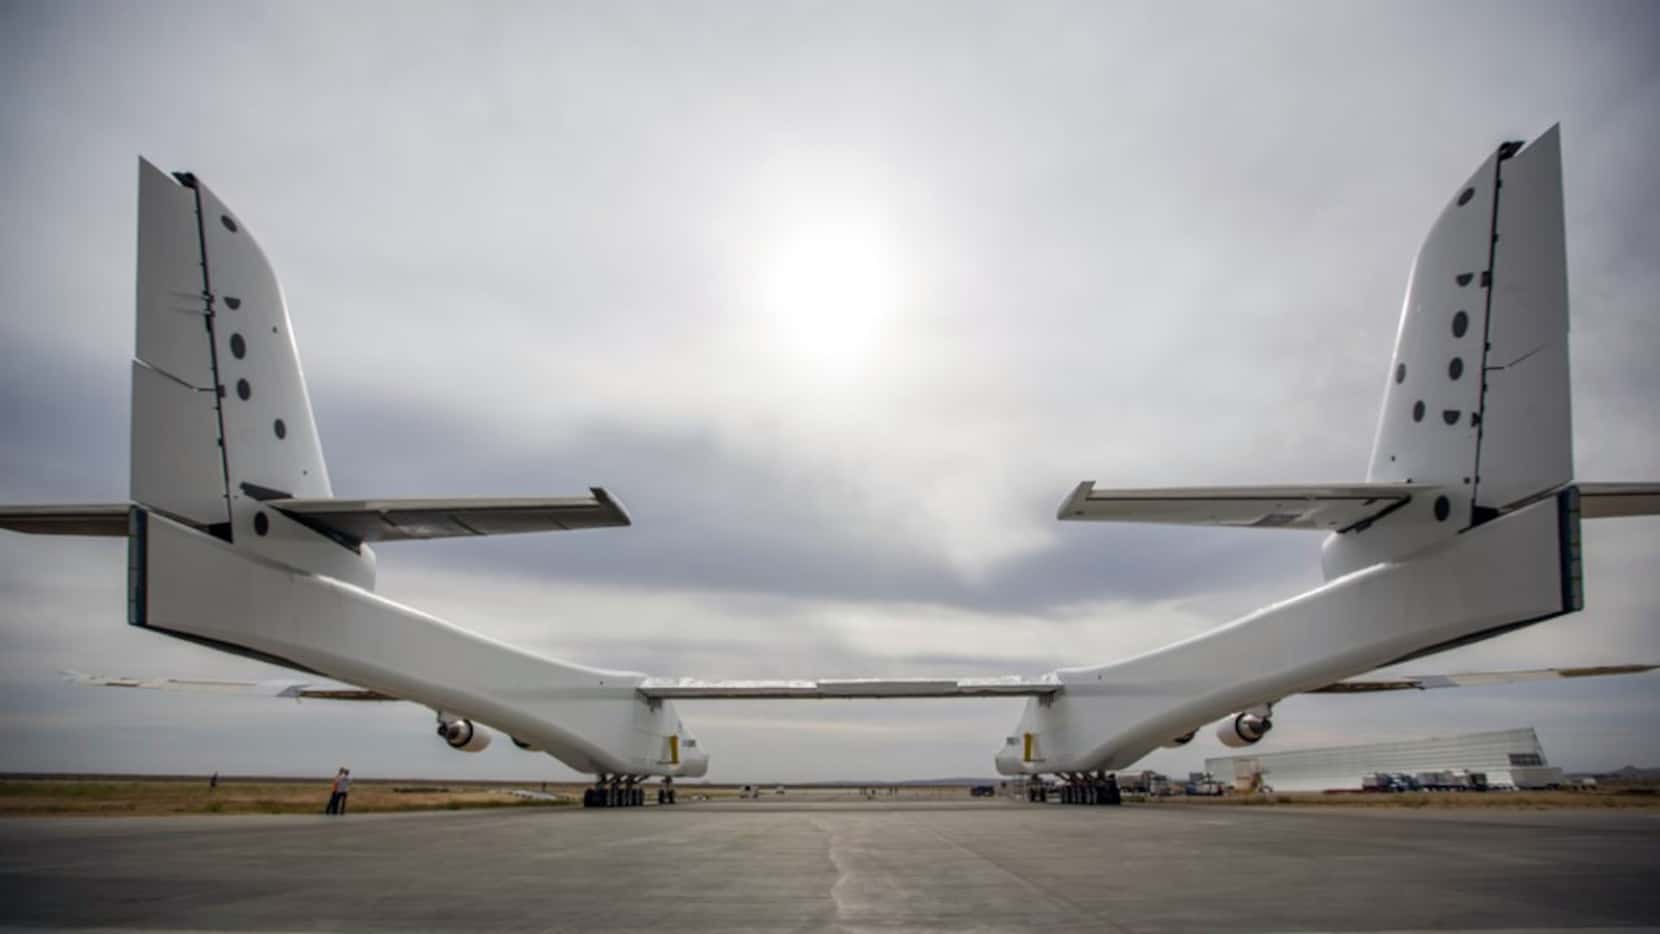 The Stratolaunch aircraft is powered by six engines of the same type used in Boeing 747s.